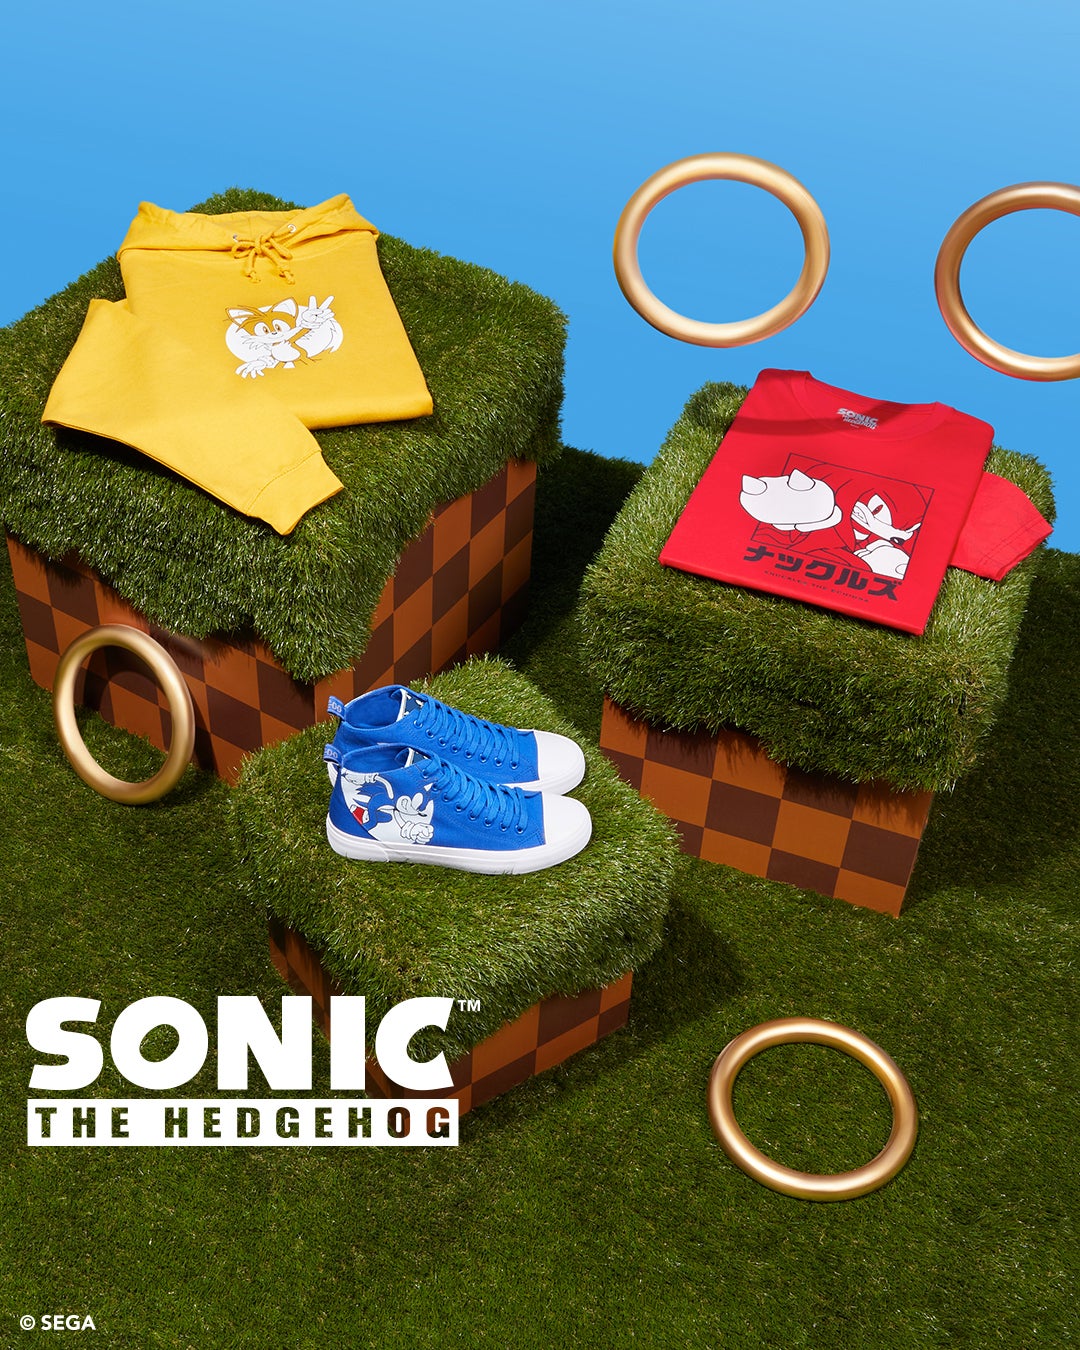 Sonic The Hedgehog collection